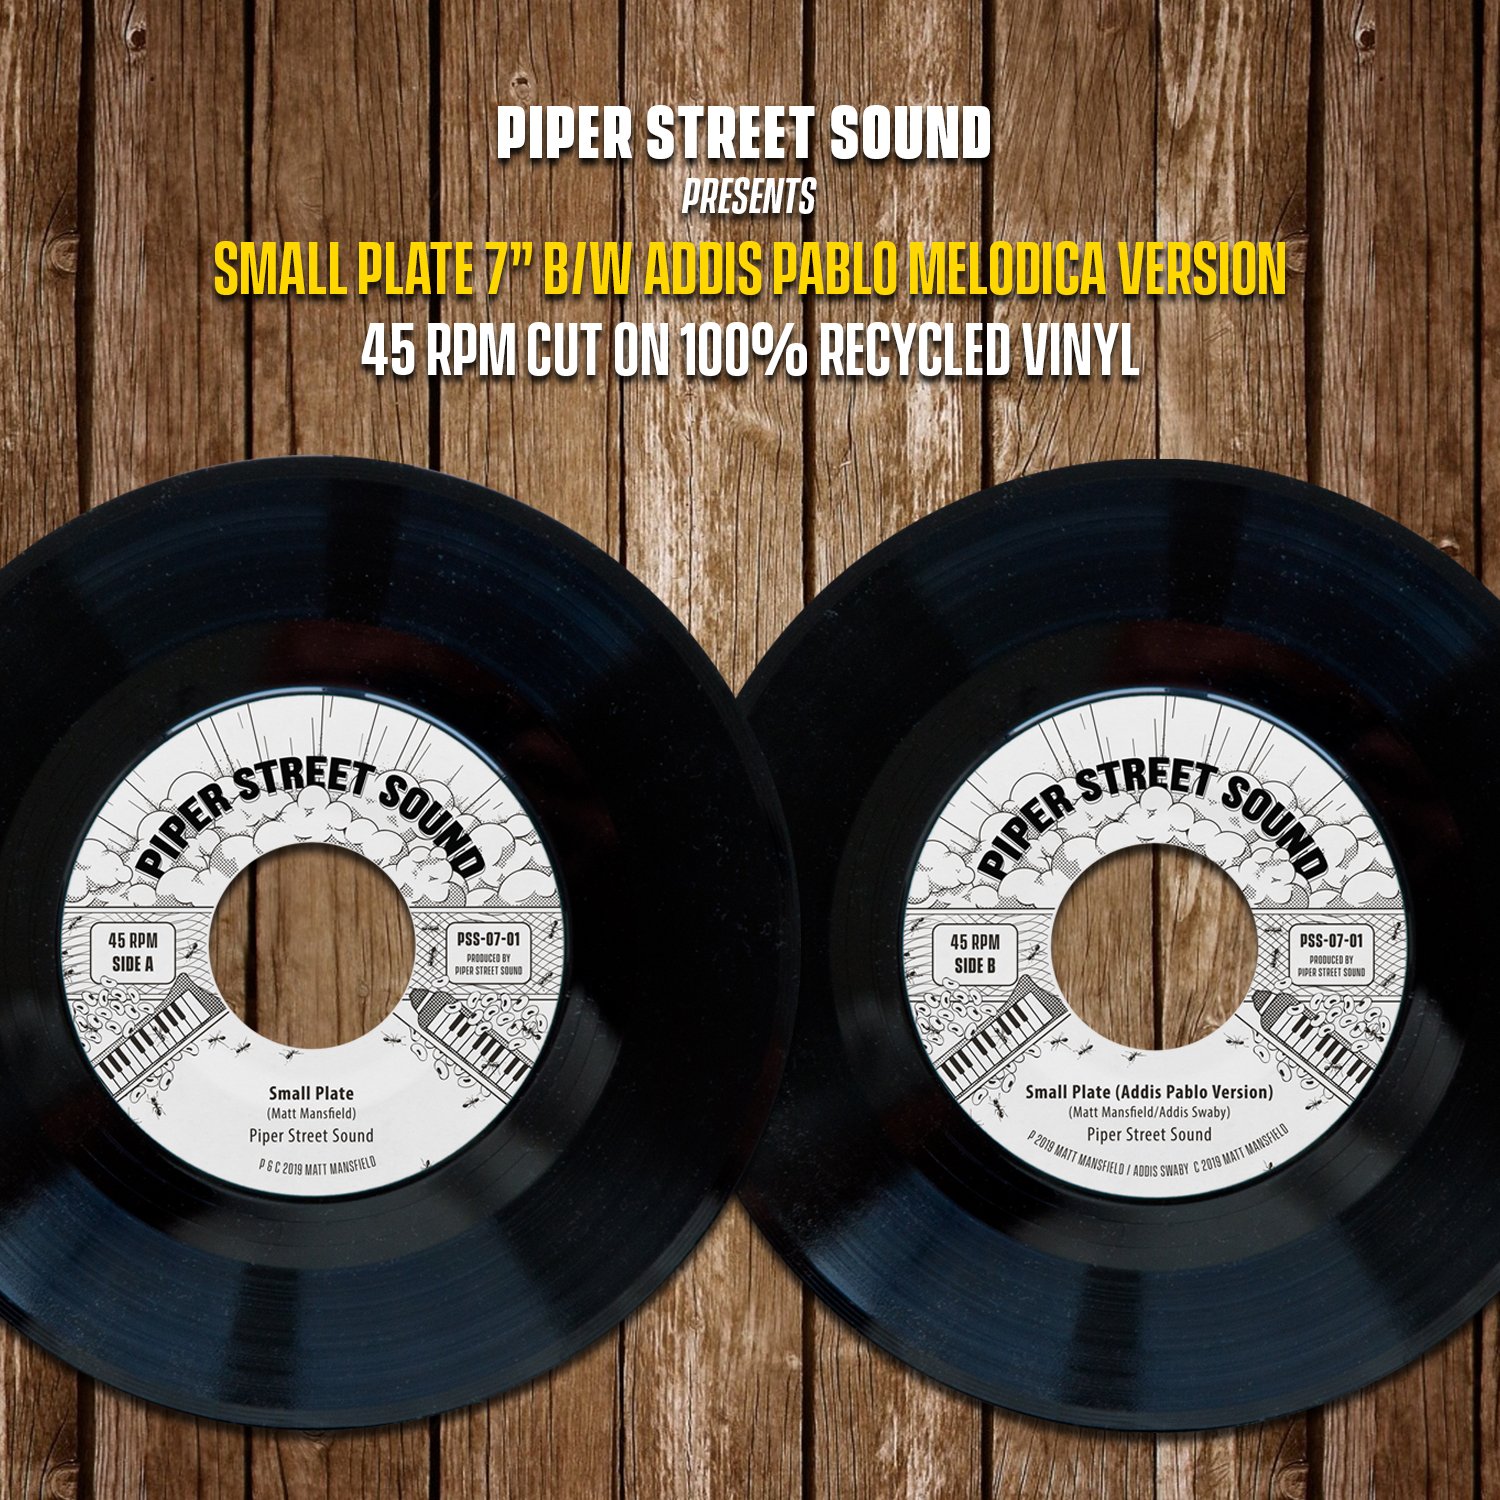 Piper Street Sound - Small Plate - Vinyl Mock Up w: text - Square.jpg